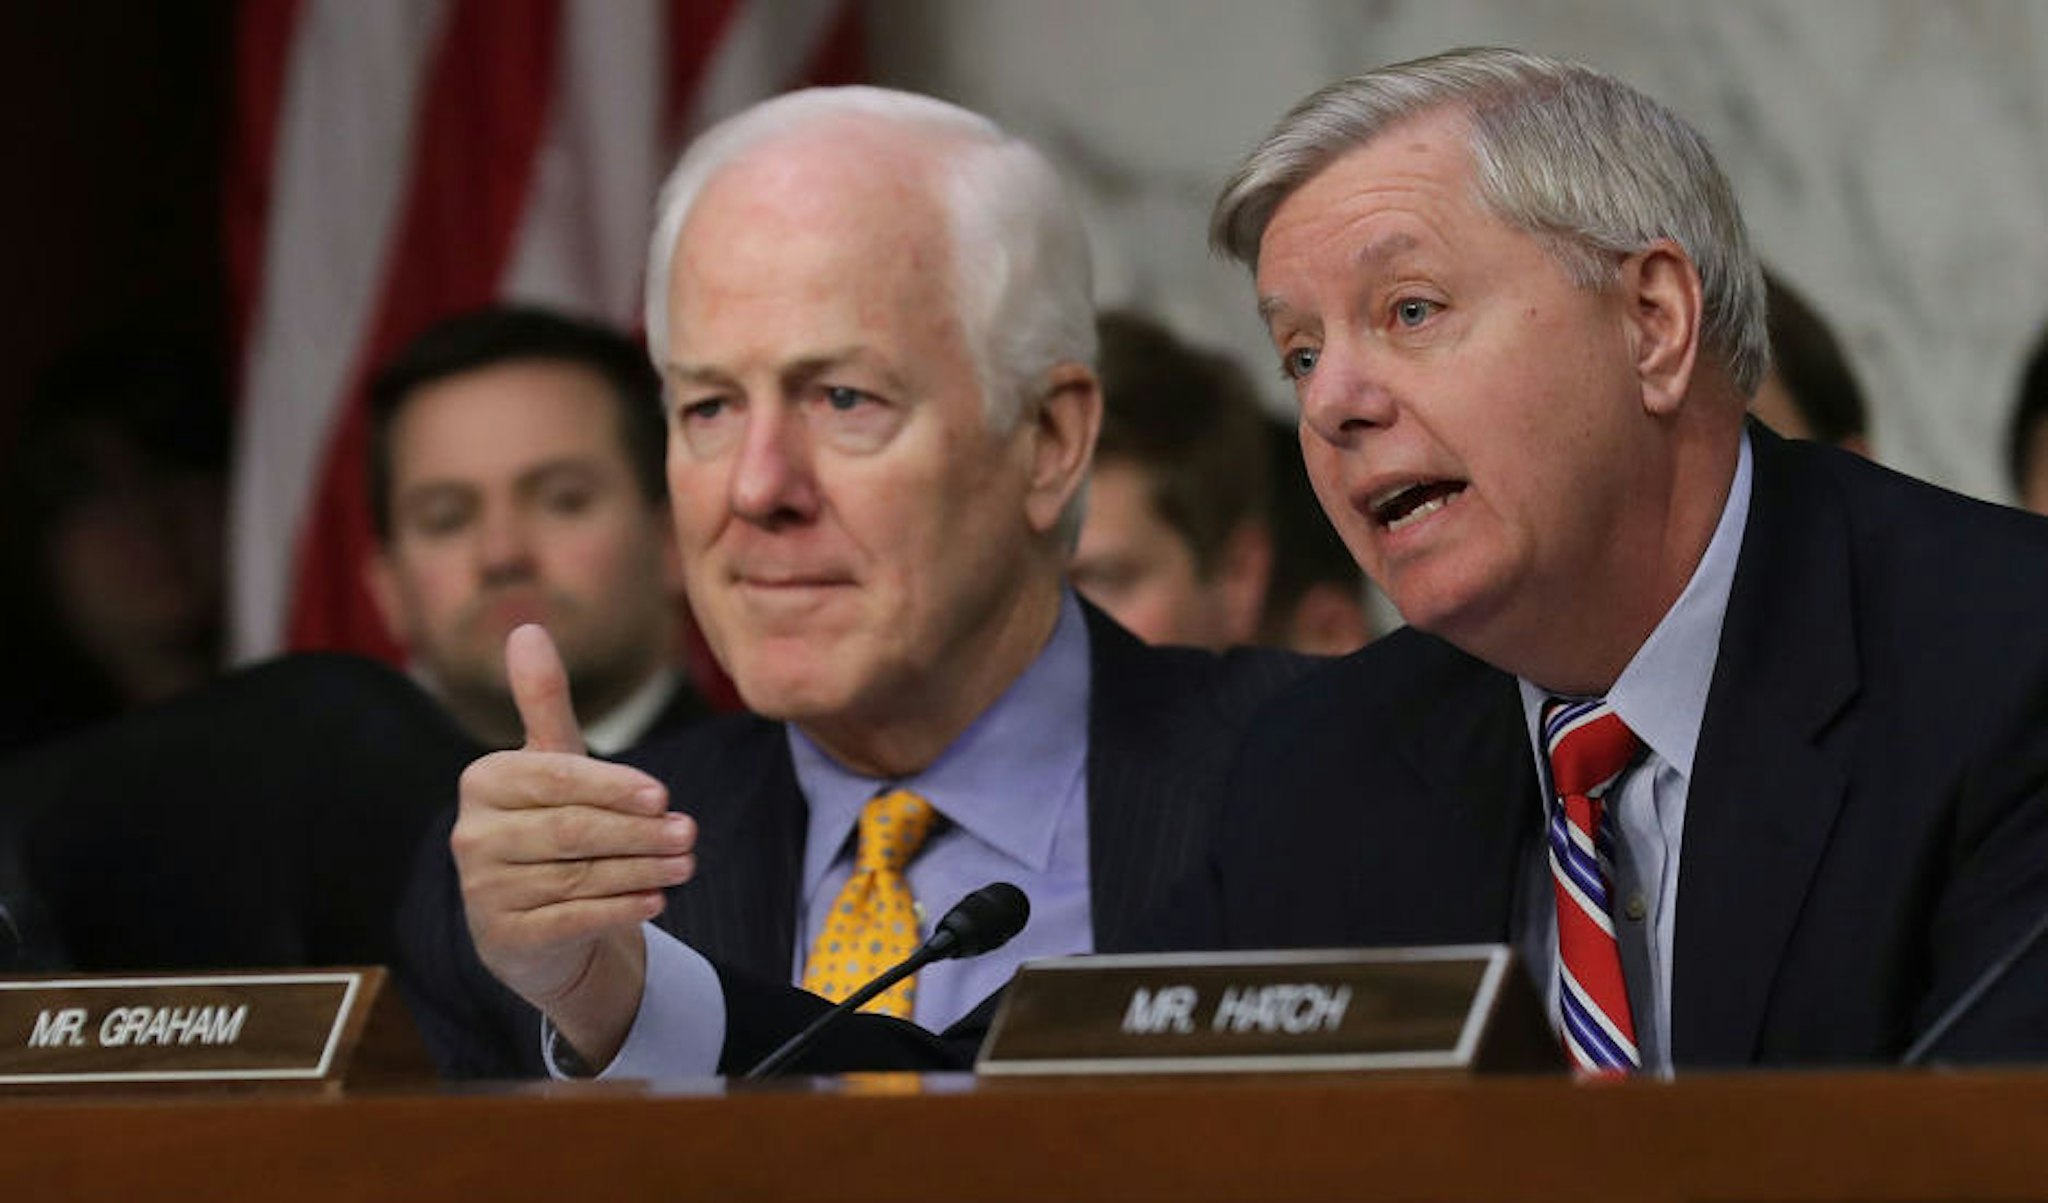 Senate Judiciary Committee member Sen. Lindsey Graham (R-SC) (R) delivers an opening statement with Sen. John Cornyn (R-TX) during Judge Neil Gorsuch's Supreme Court confirmation hearing in the Hart Senate Office Building on Capitol Hill March 20, 2017 in Washington, DC.